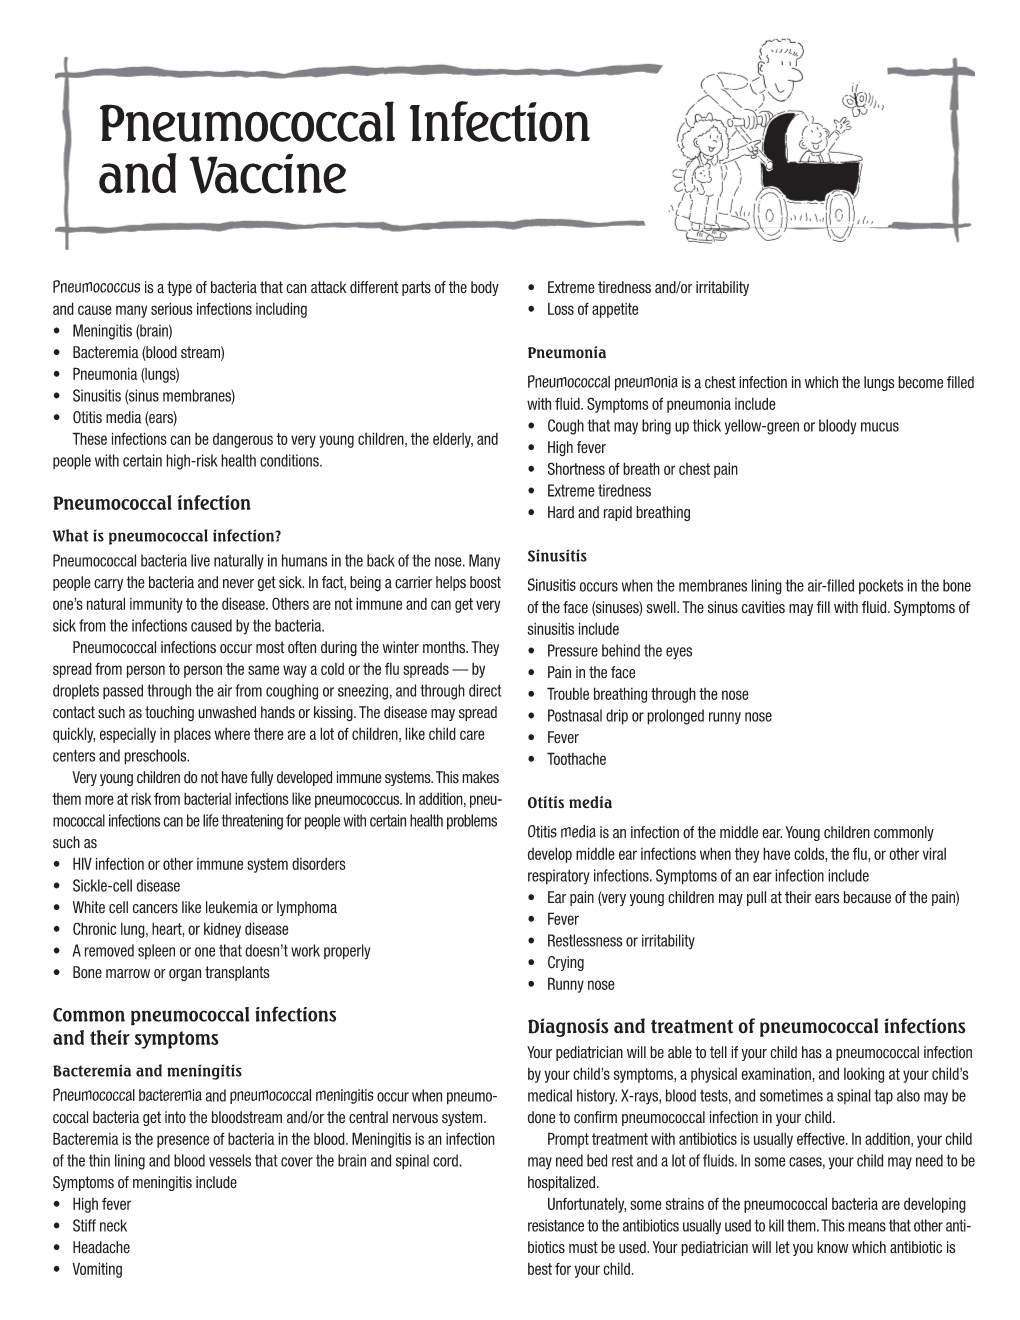 Pneumococcal Infection and Vaccine